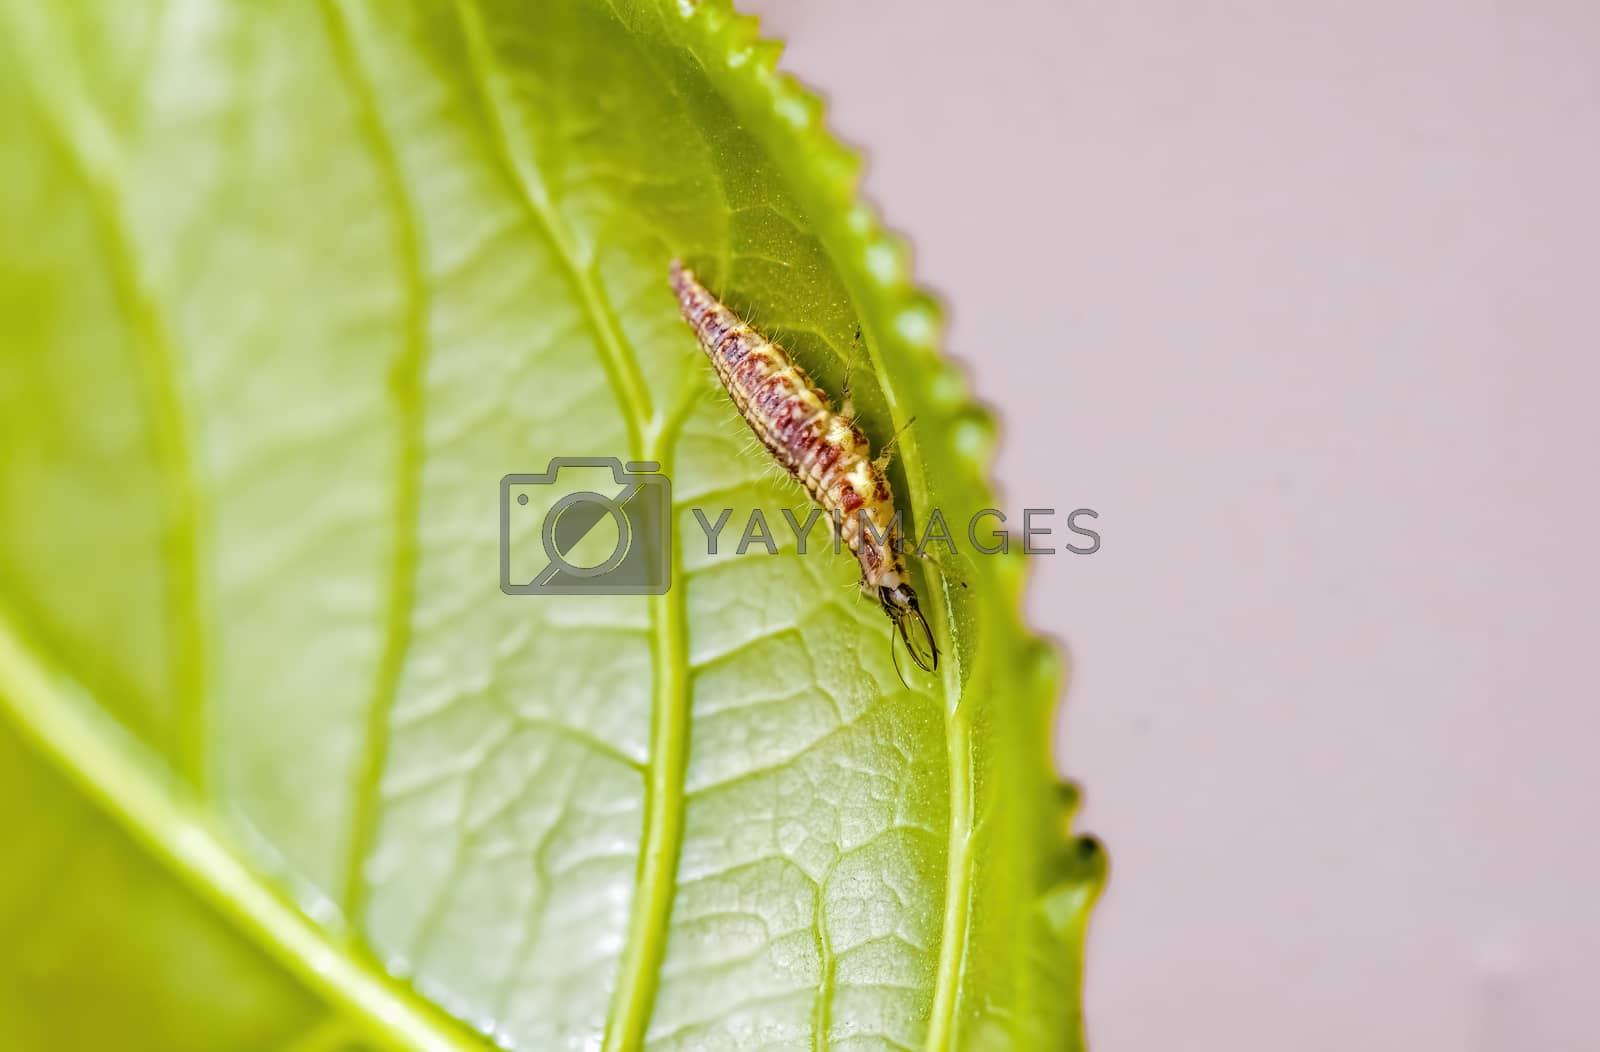 Royalty free image of a Small larvae insect on a plant in the meadow by mario_plechaty_photography